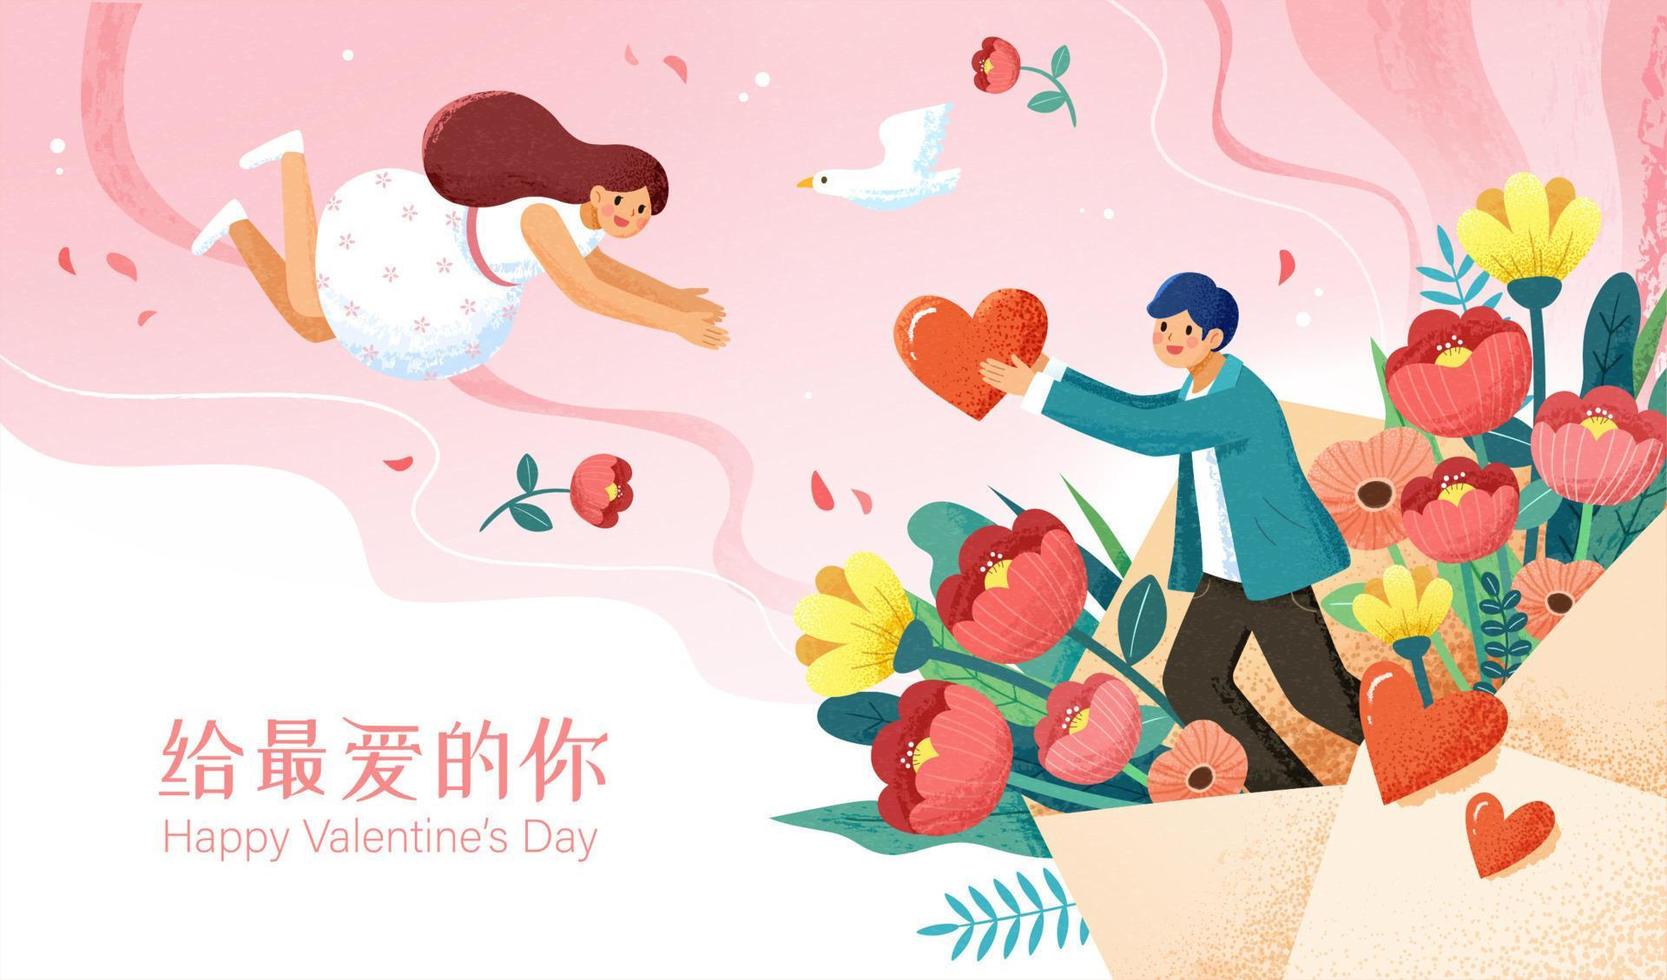 Pink floral Valentine's card. Illustration of a young man delivering flower bouquets to his loved one. vector